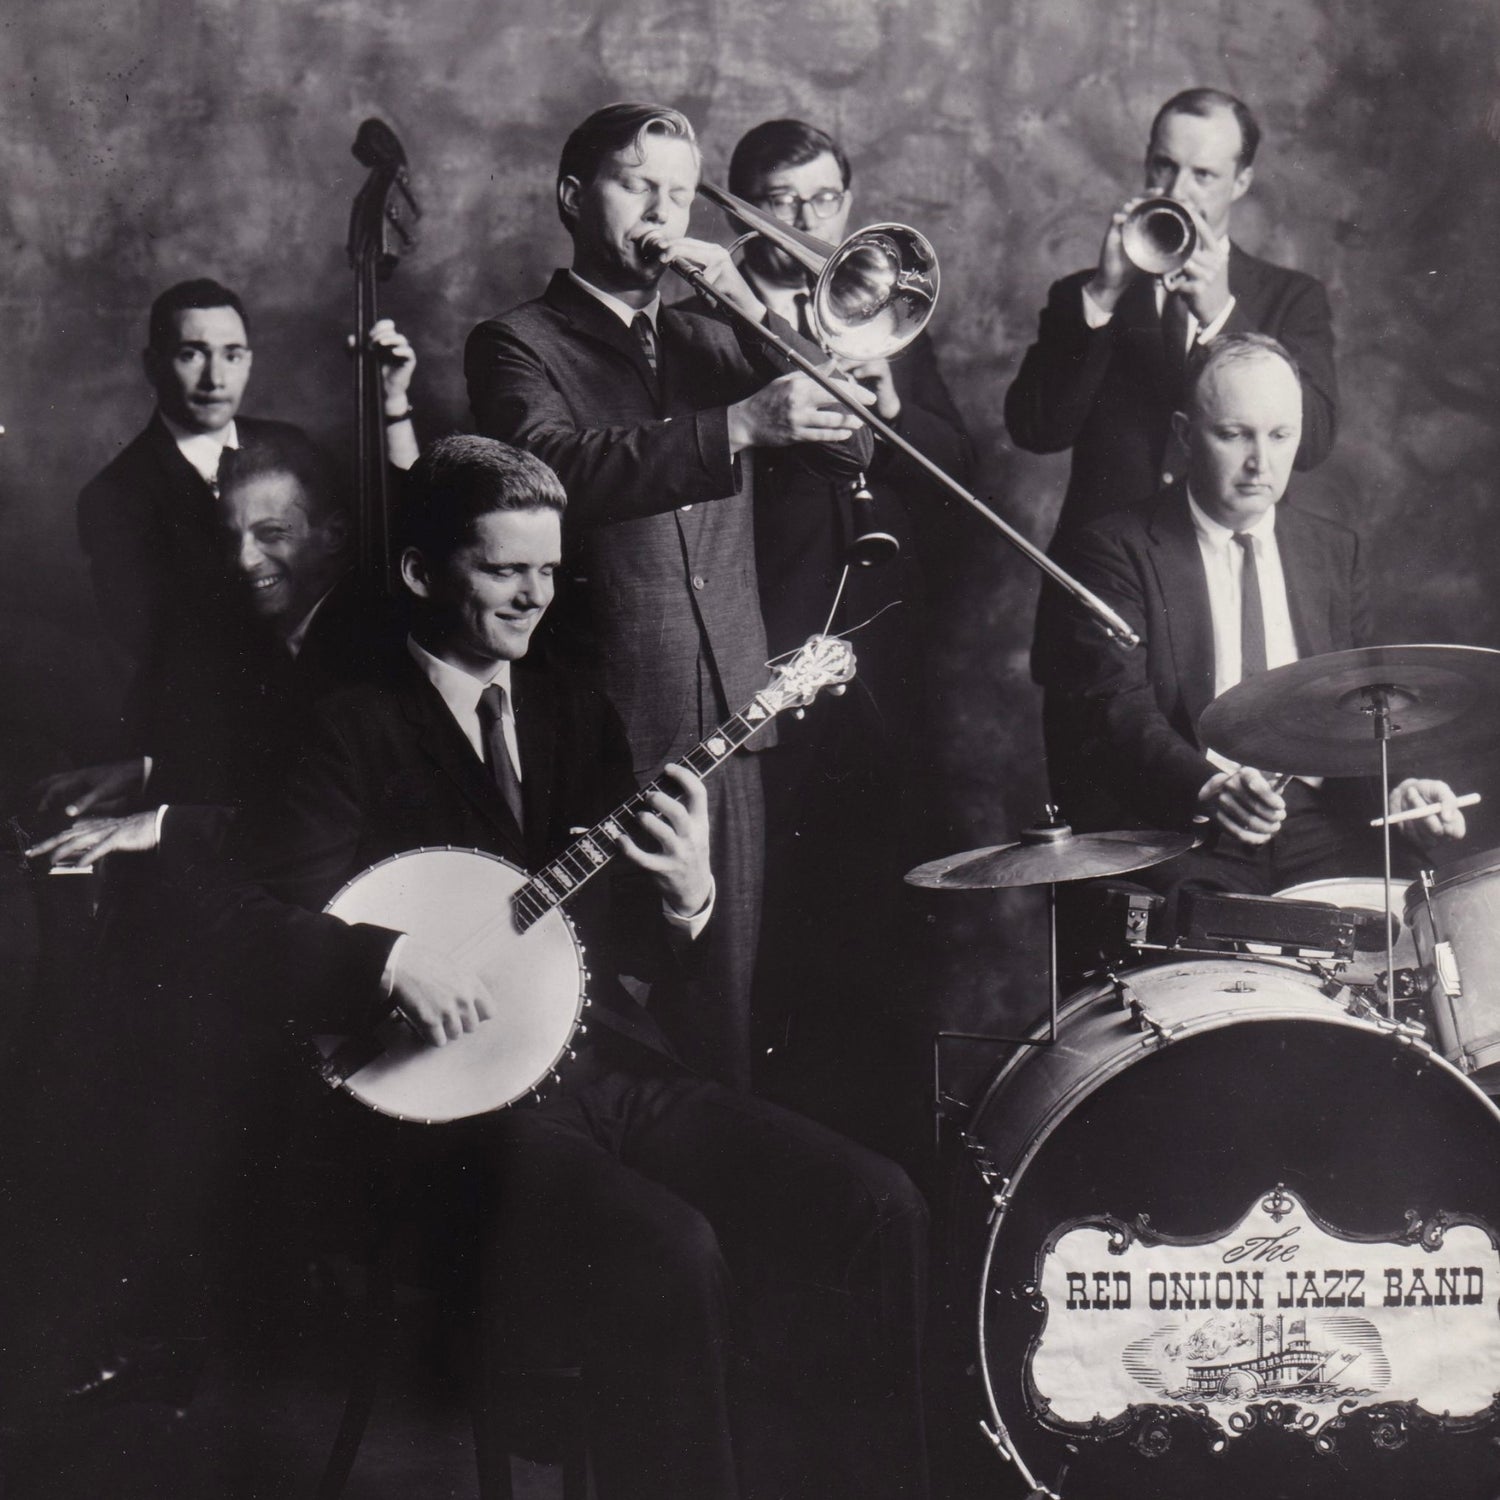 The Red Onion Jazz Band